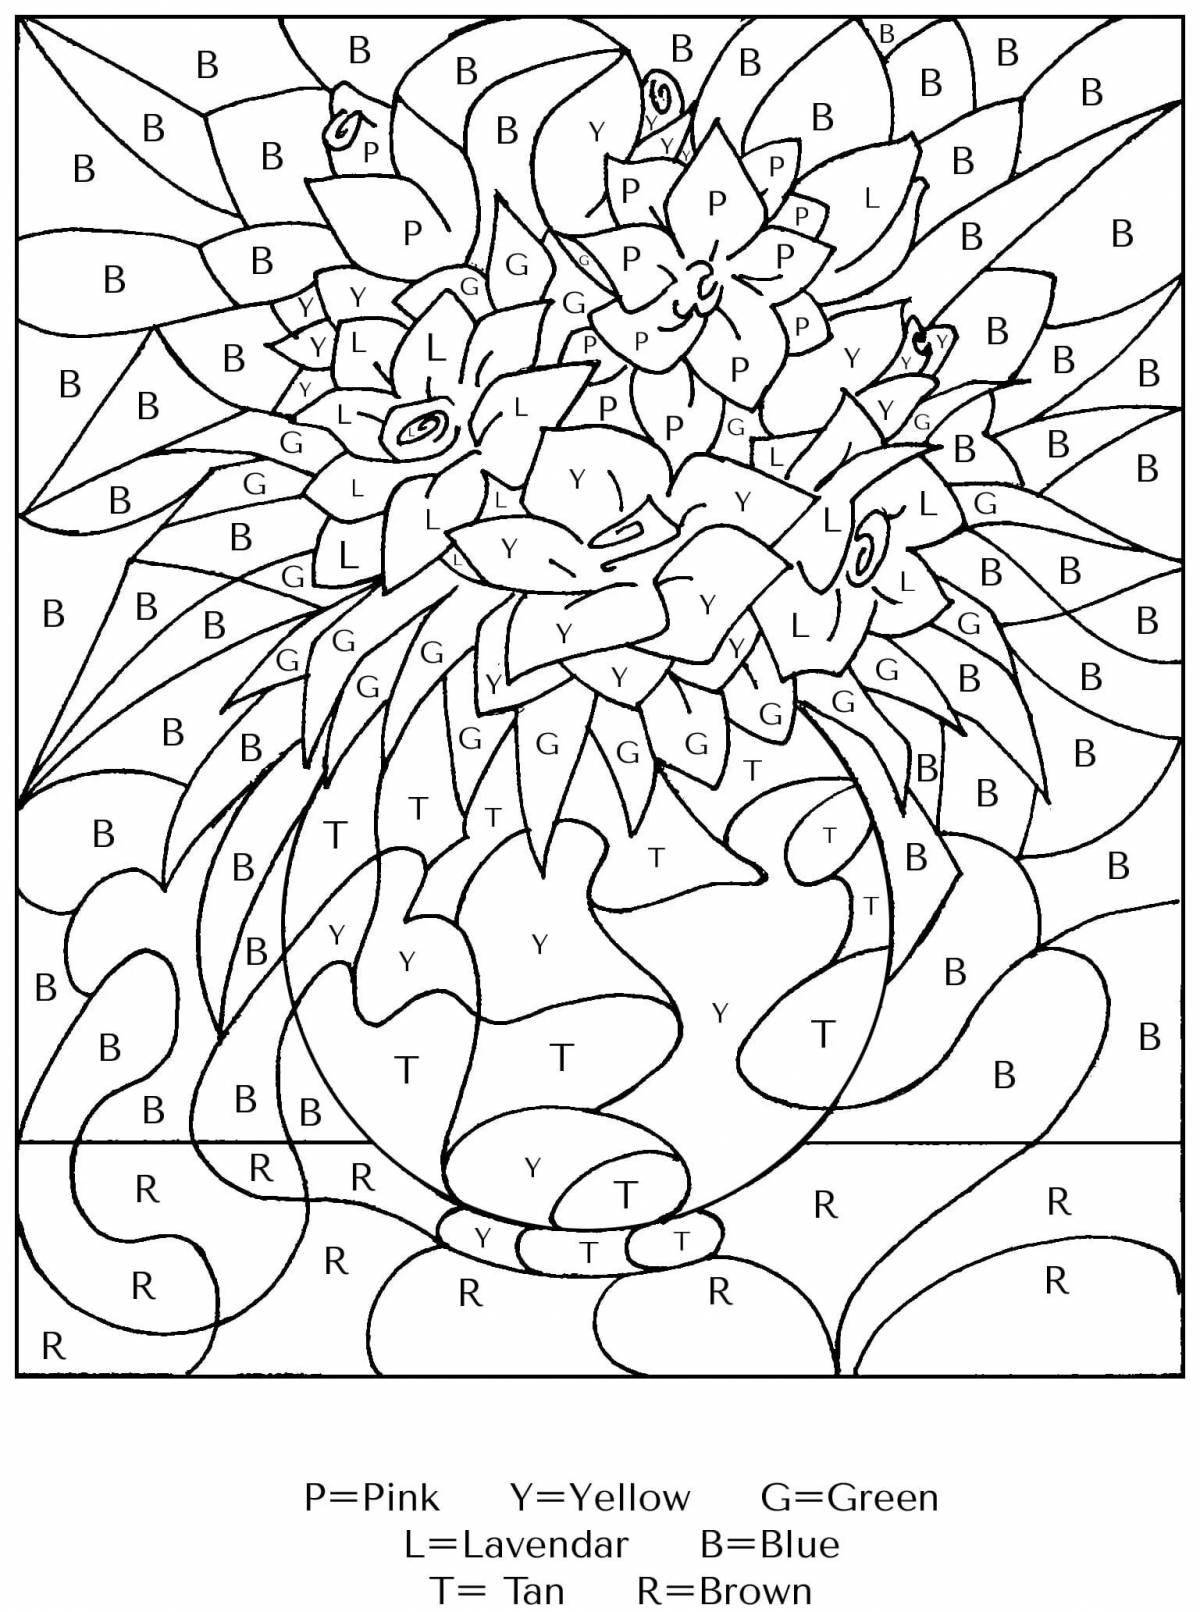 Color-vivid grade 2 coloring page by numbers